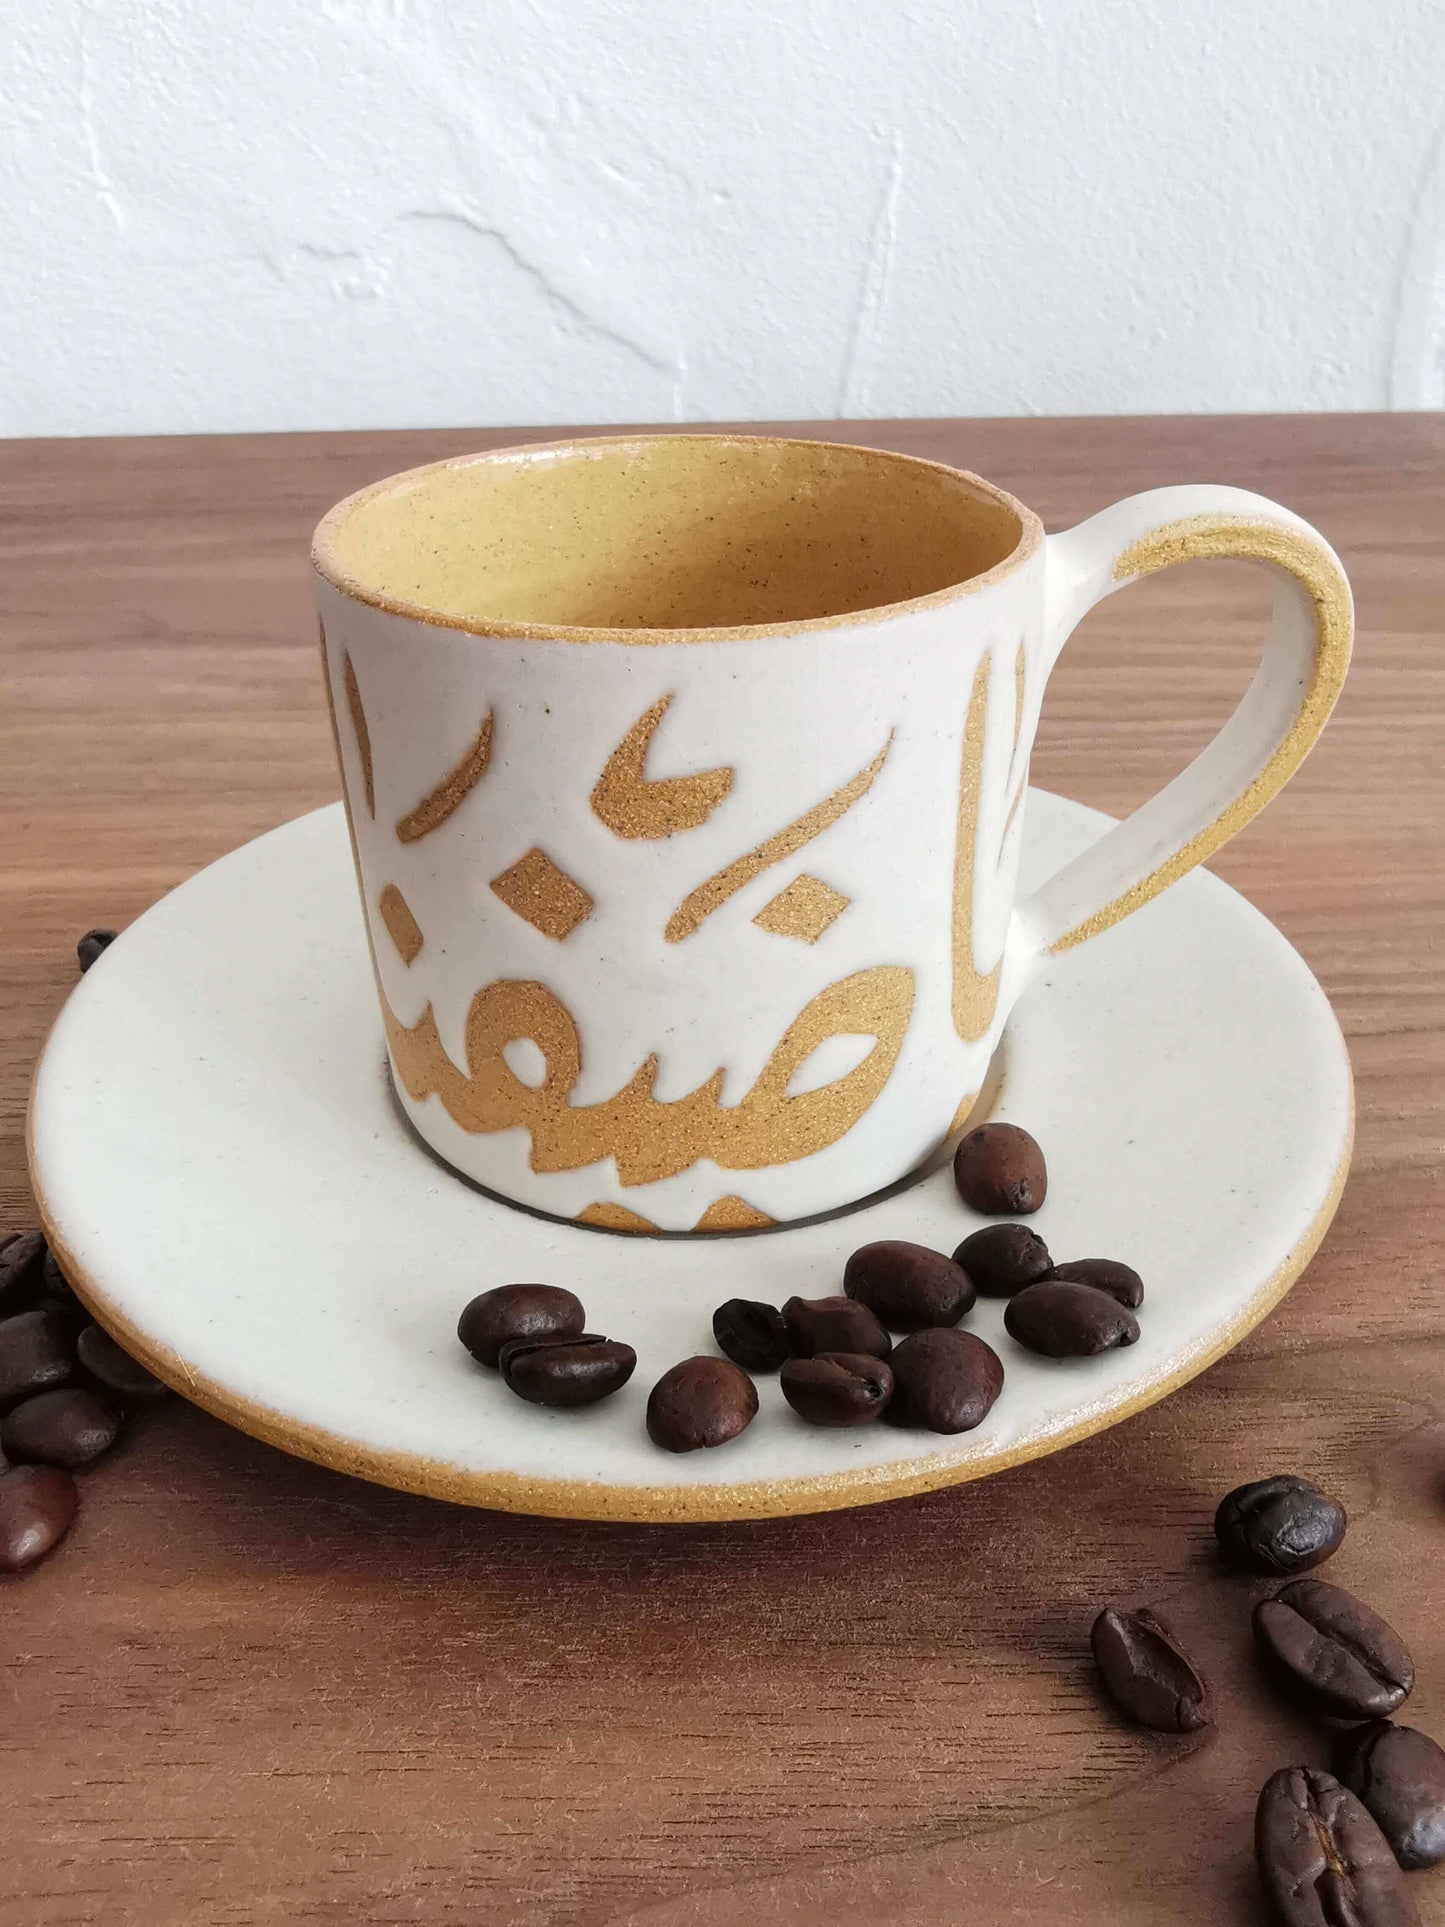 handmade pottery cup, pottery handmade, ceramic handmade pottery, Pottery dinnerware, handmade mug, Ramadan gift, mothers day gift, house warming gift, pottery cup small, Arabic calligraphy art, handwritten calligraphy, handwritten Arabic calligraphy